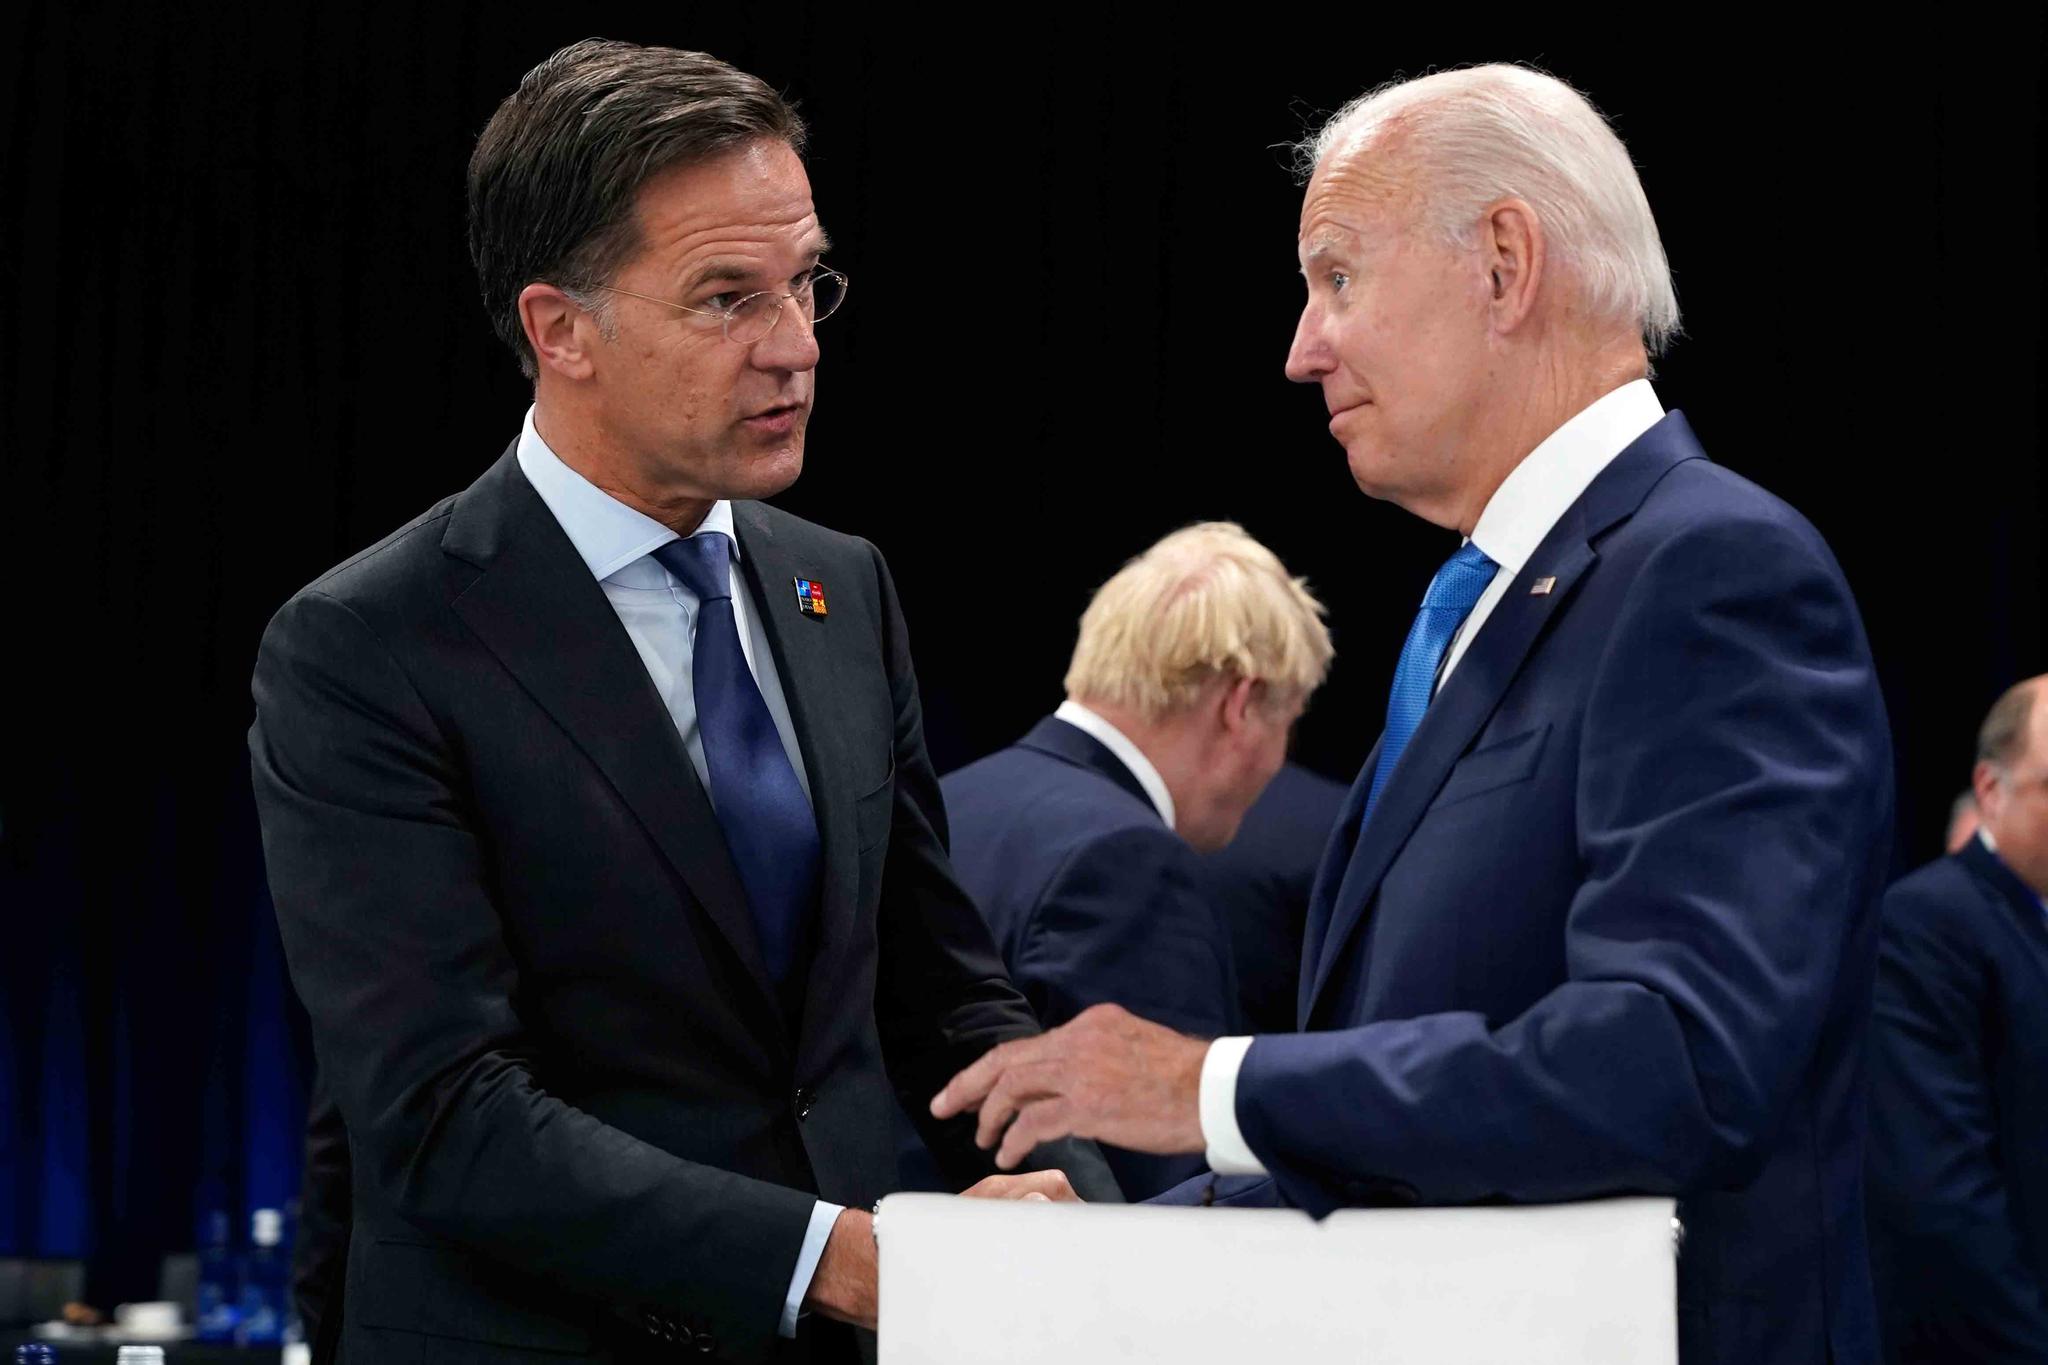 Netherland's Prime Minister Mark Rutte, left, speaks with U.S. President Joe Biden during a round table meeting at a NATO summit in Madrid, Spain, June 29, 2022.